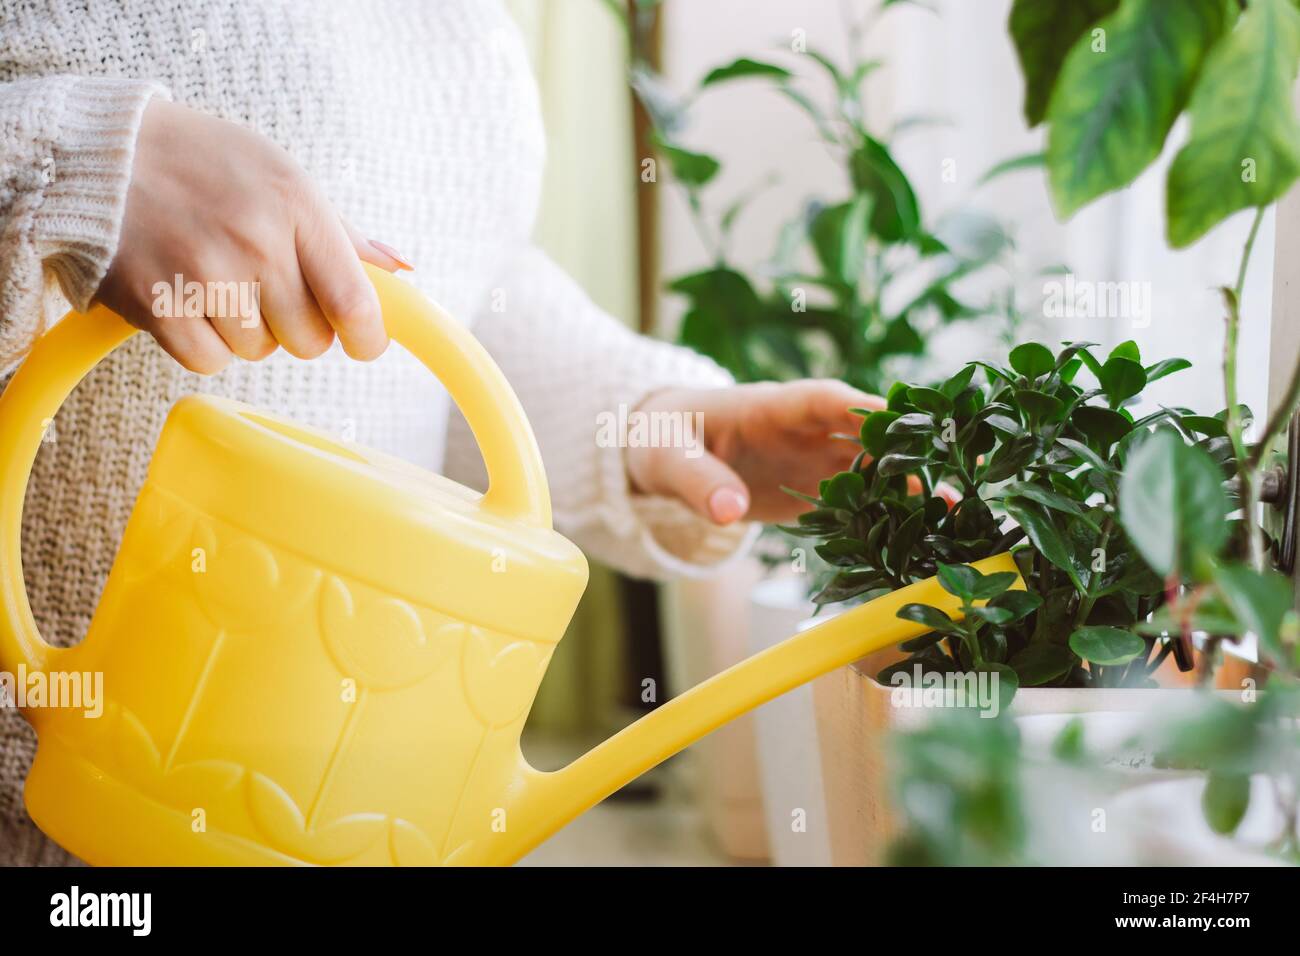 Woman waters potted plants from yellow watering can. Home garden care. Stock Photo